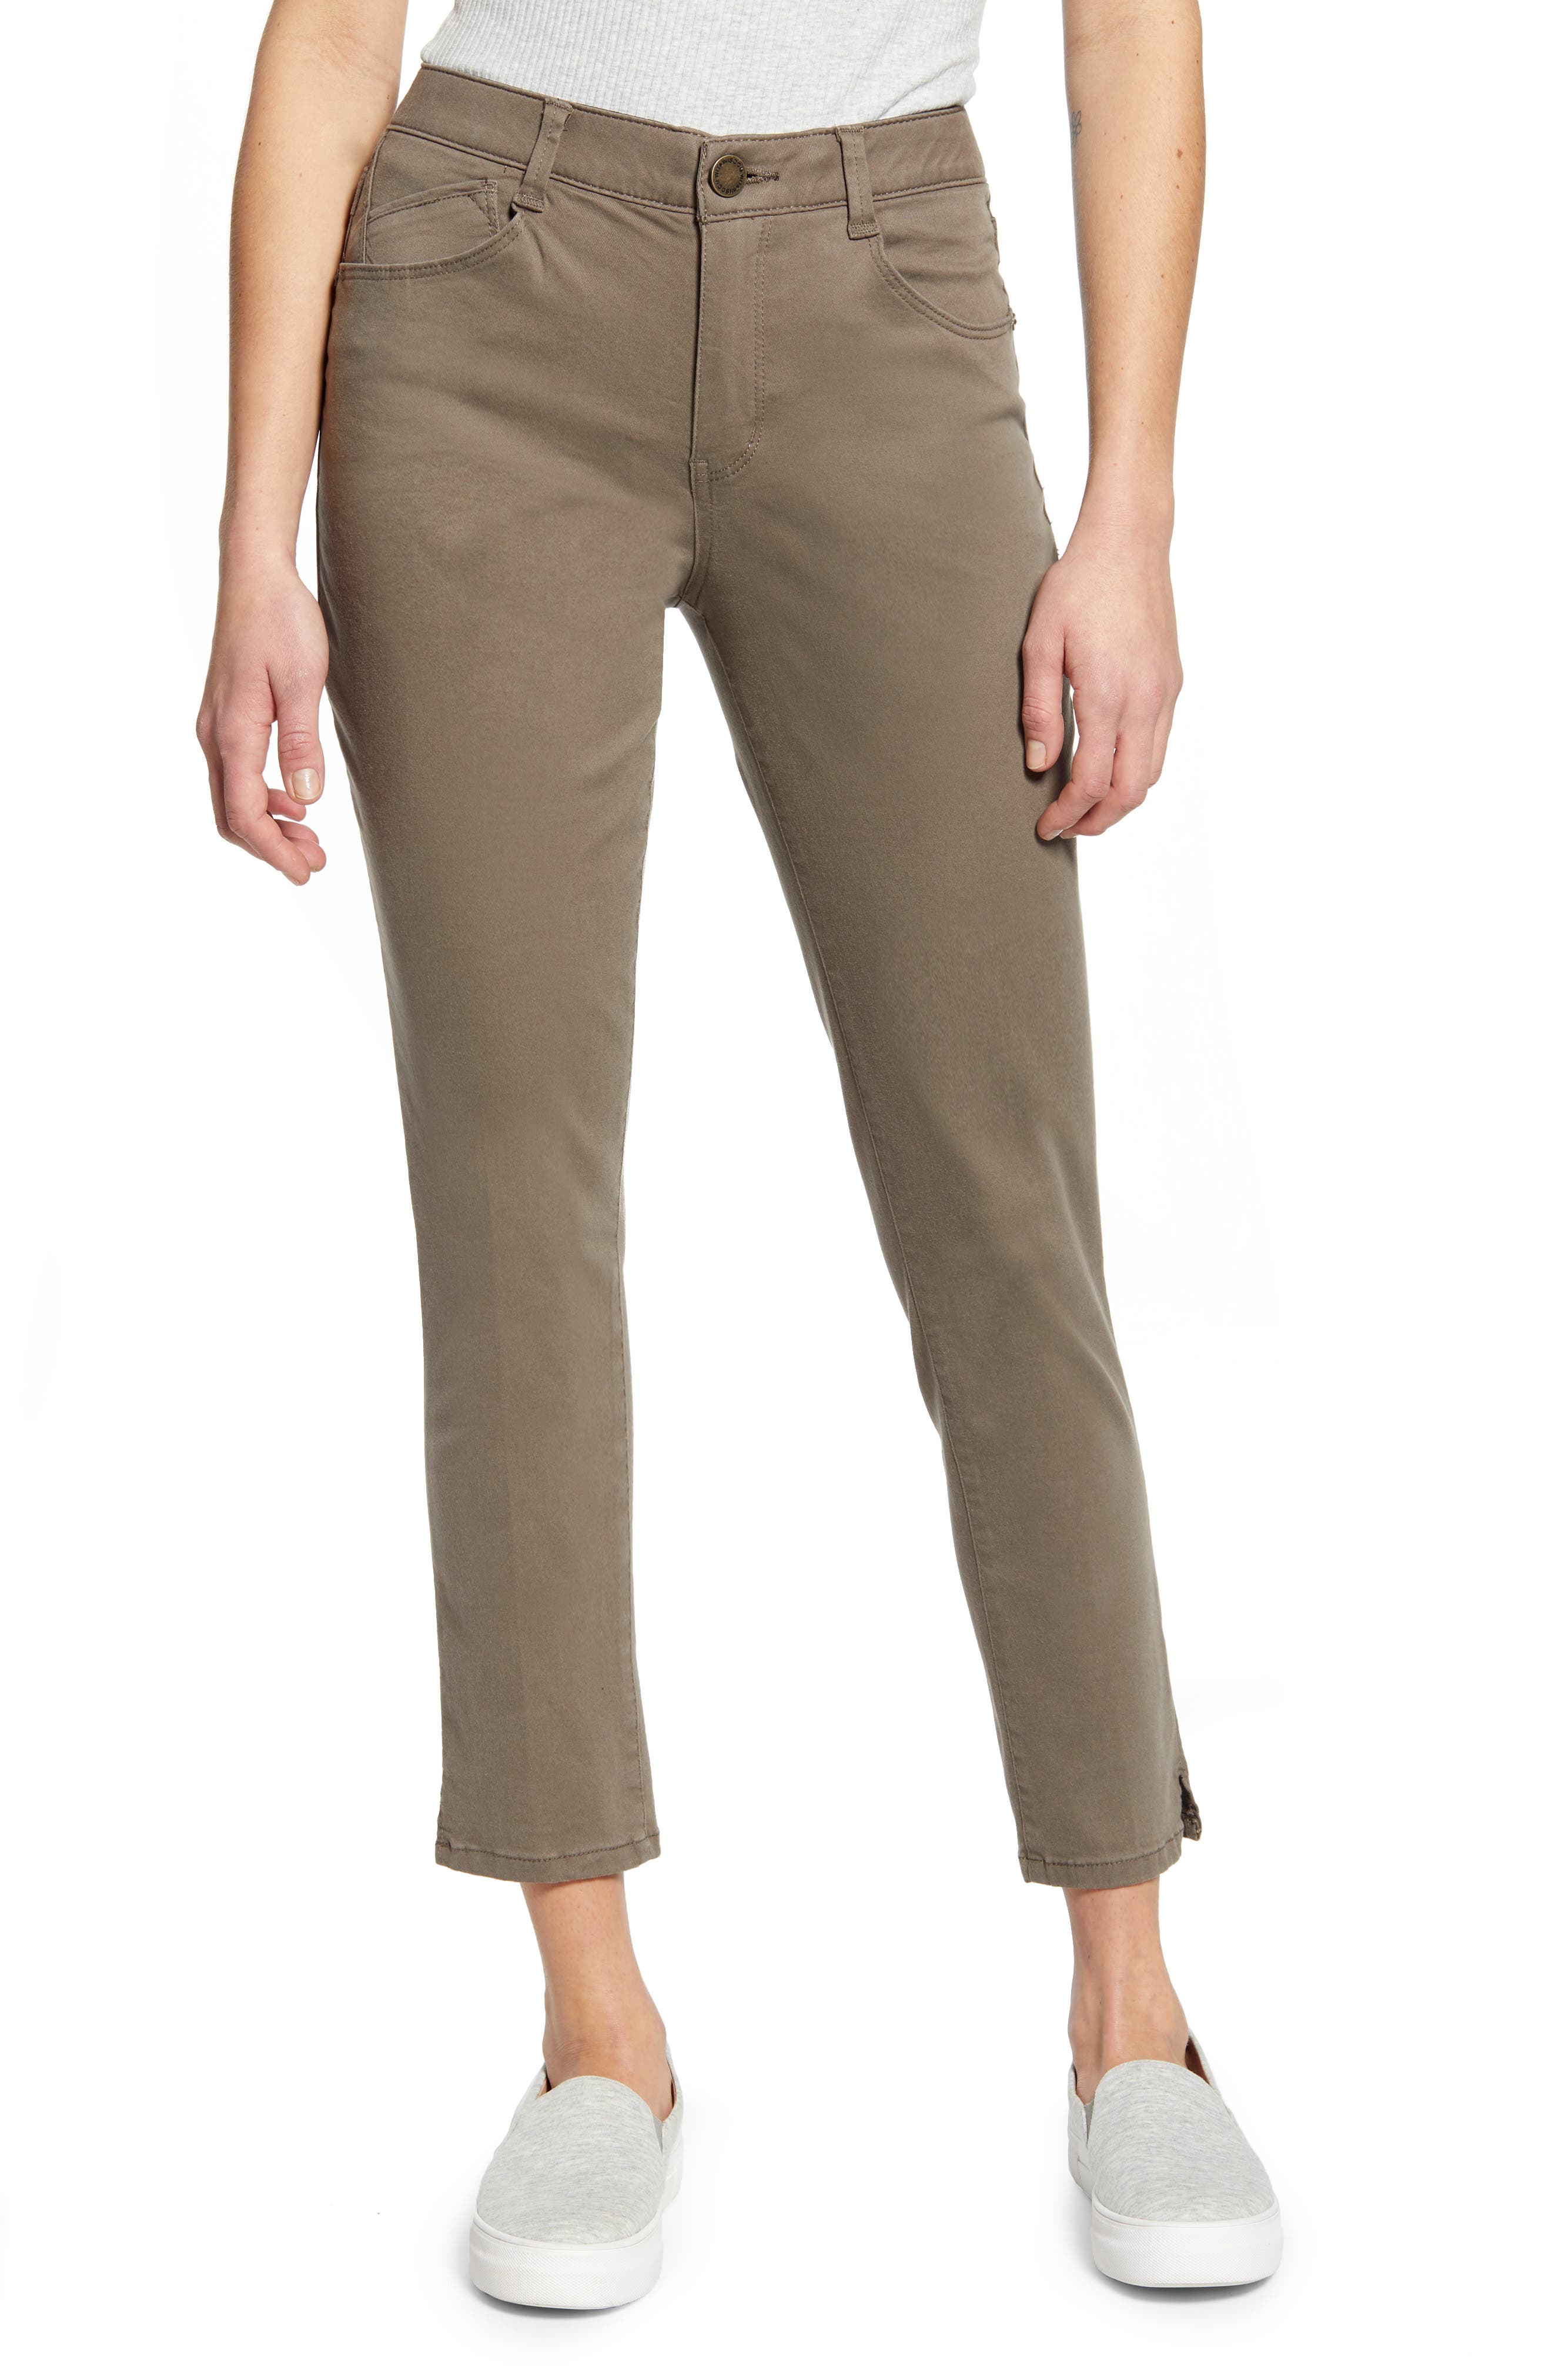 wit and wisdom petite pants